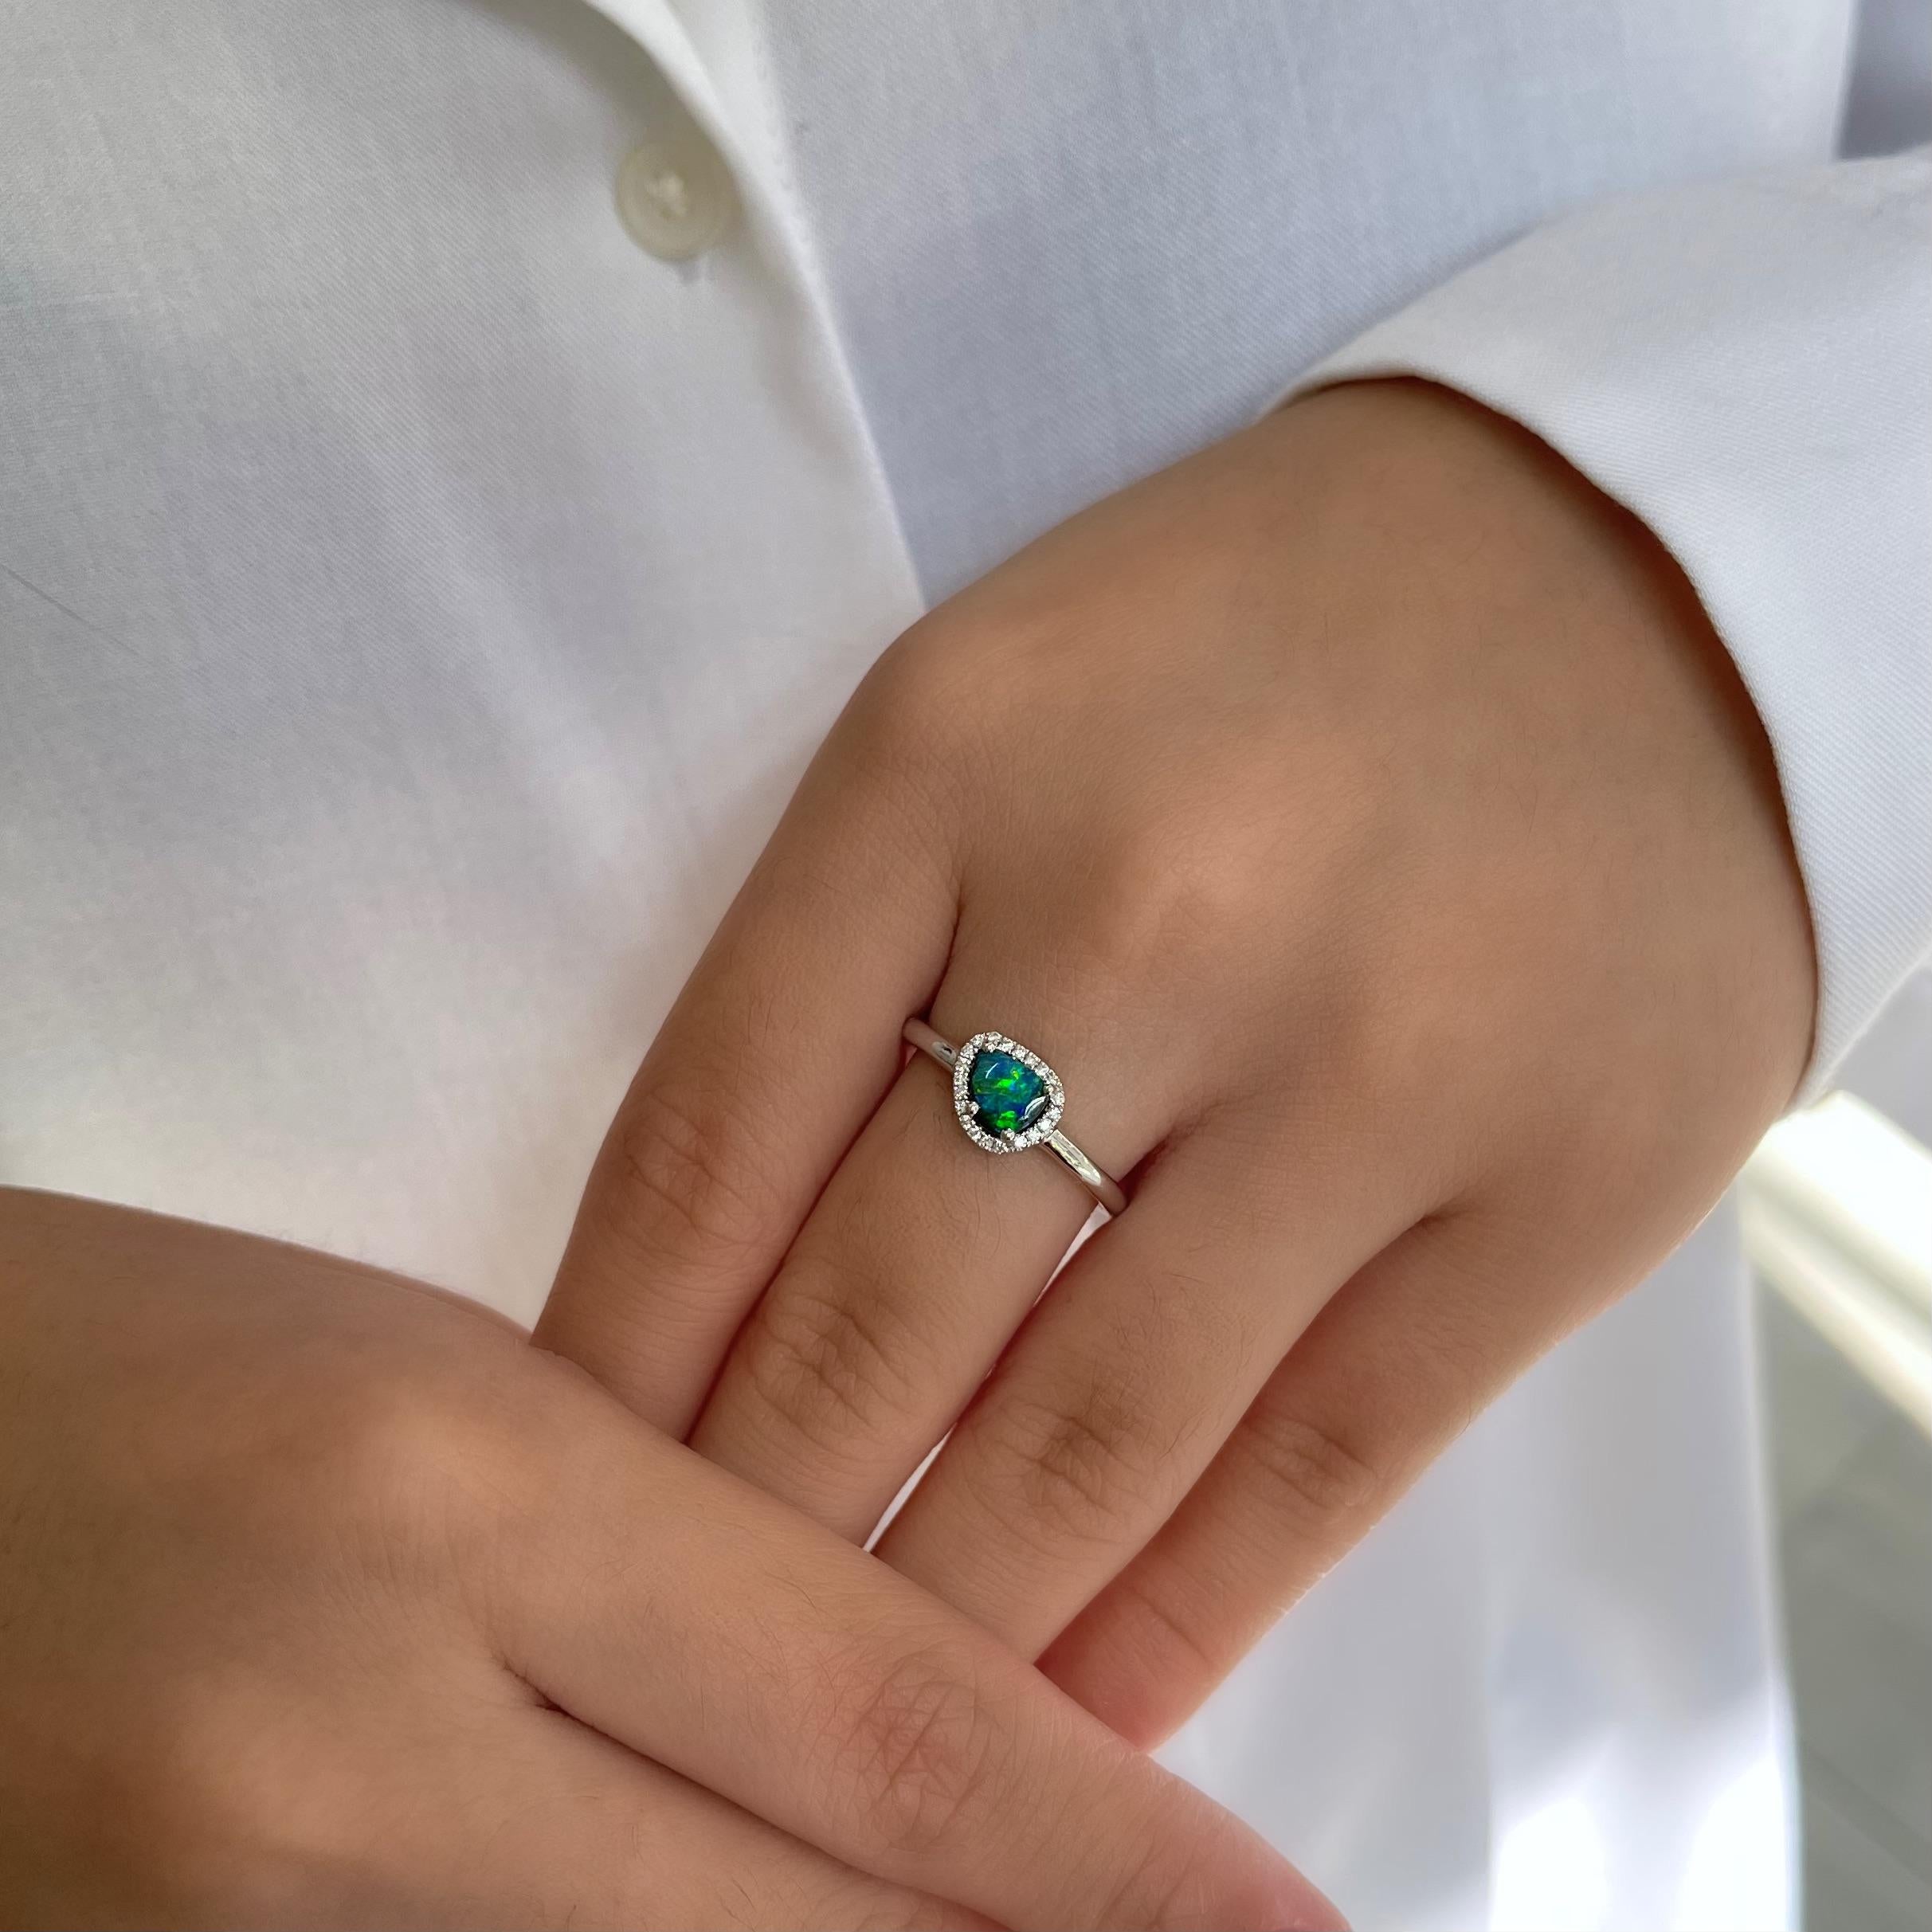 A piece that will not pass unnoticed. The 'Meet the Cute' features a peerless boulder opal (0.68ct) ethically sourced from our own mines in Jundah-Opalville. Wonderfully crafted in 18K white gold and flanked by twinkling diamonds, the opal